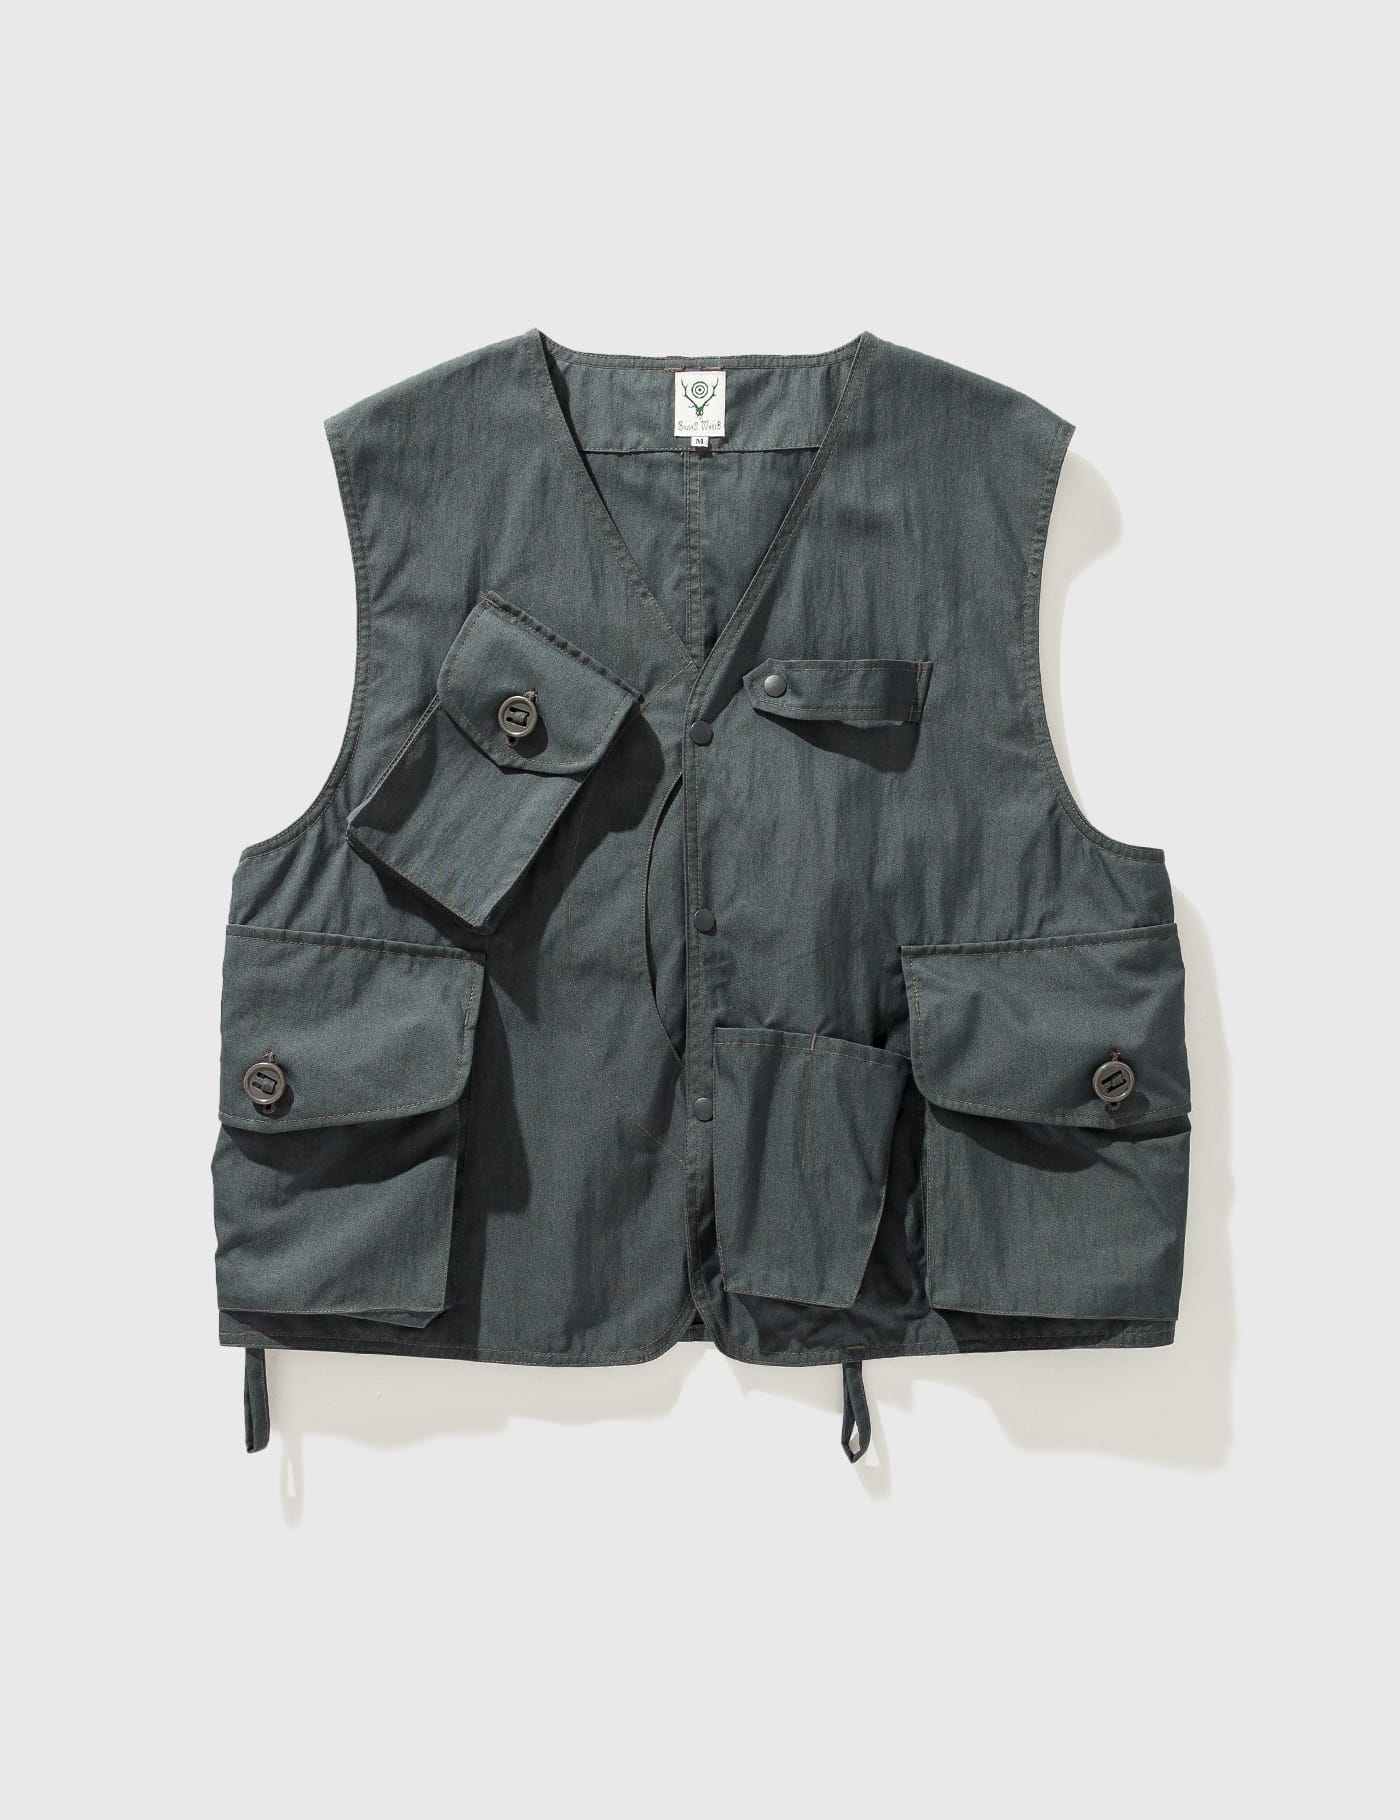 South2 West8 - Tenkara Vest | HBX - Globally Curated Fashion and 